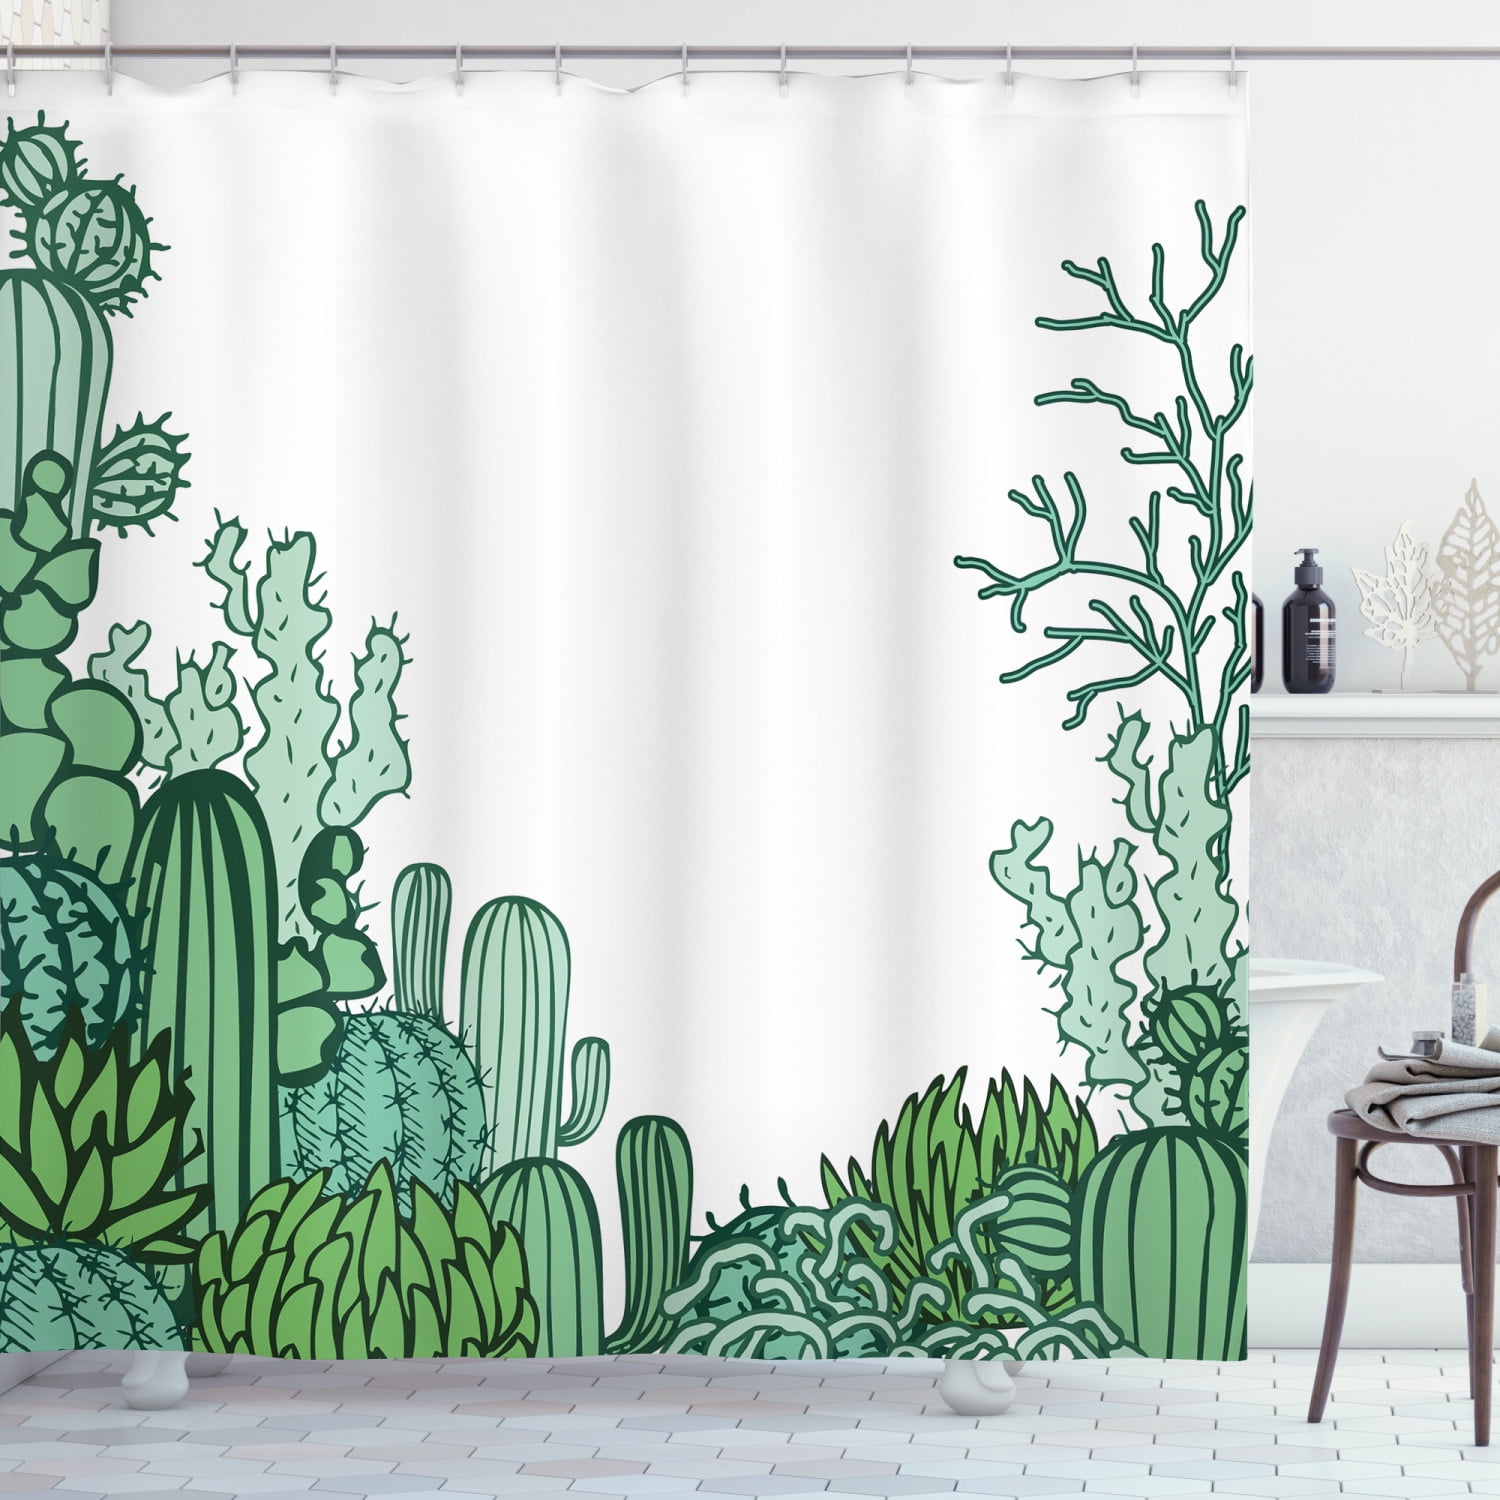 Arizona Desert Themed Doodle Cactus Staghorn Buckhorn Ocotillo Plants Washable Fabric Placemats for Dining Room Kitchen Table Decor Ambesonne Cactus Place Mats Set of 4 Green Pale Green Seafoam 